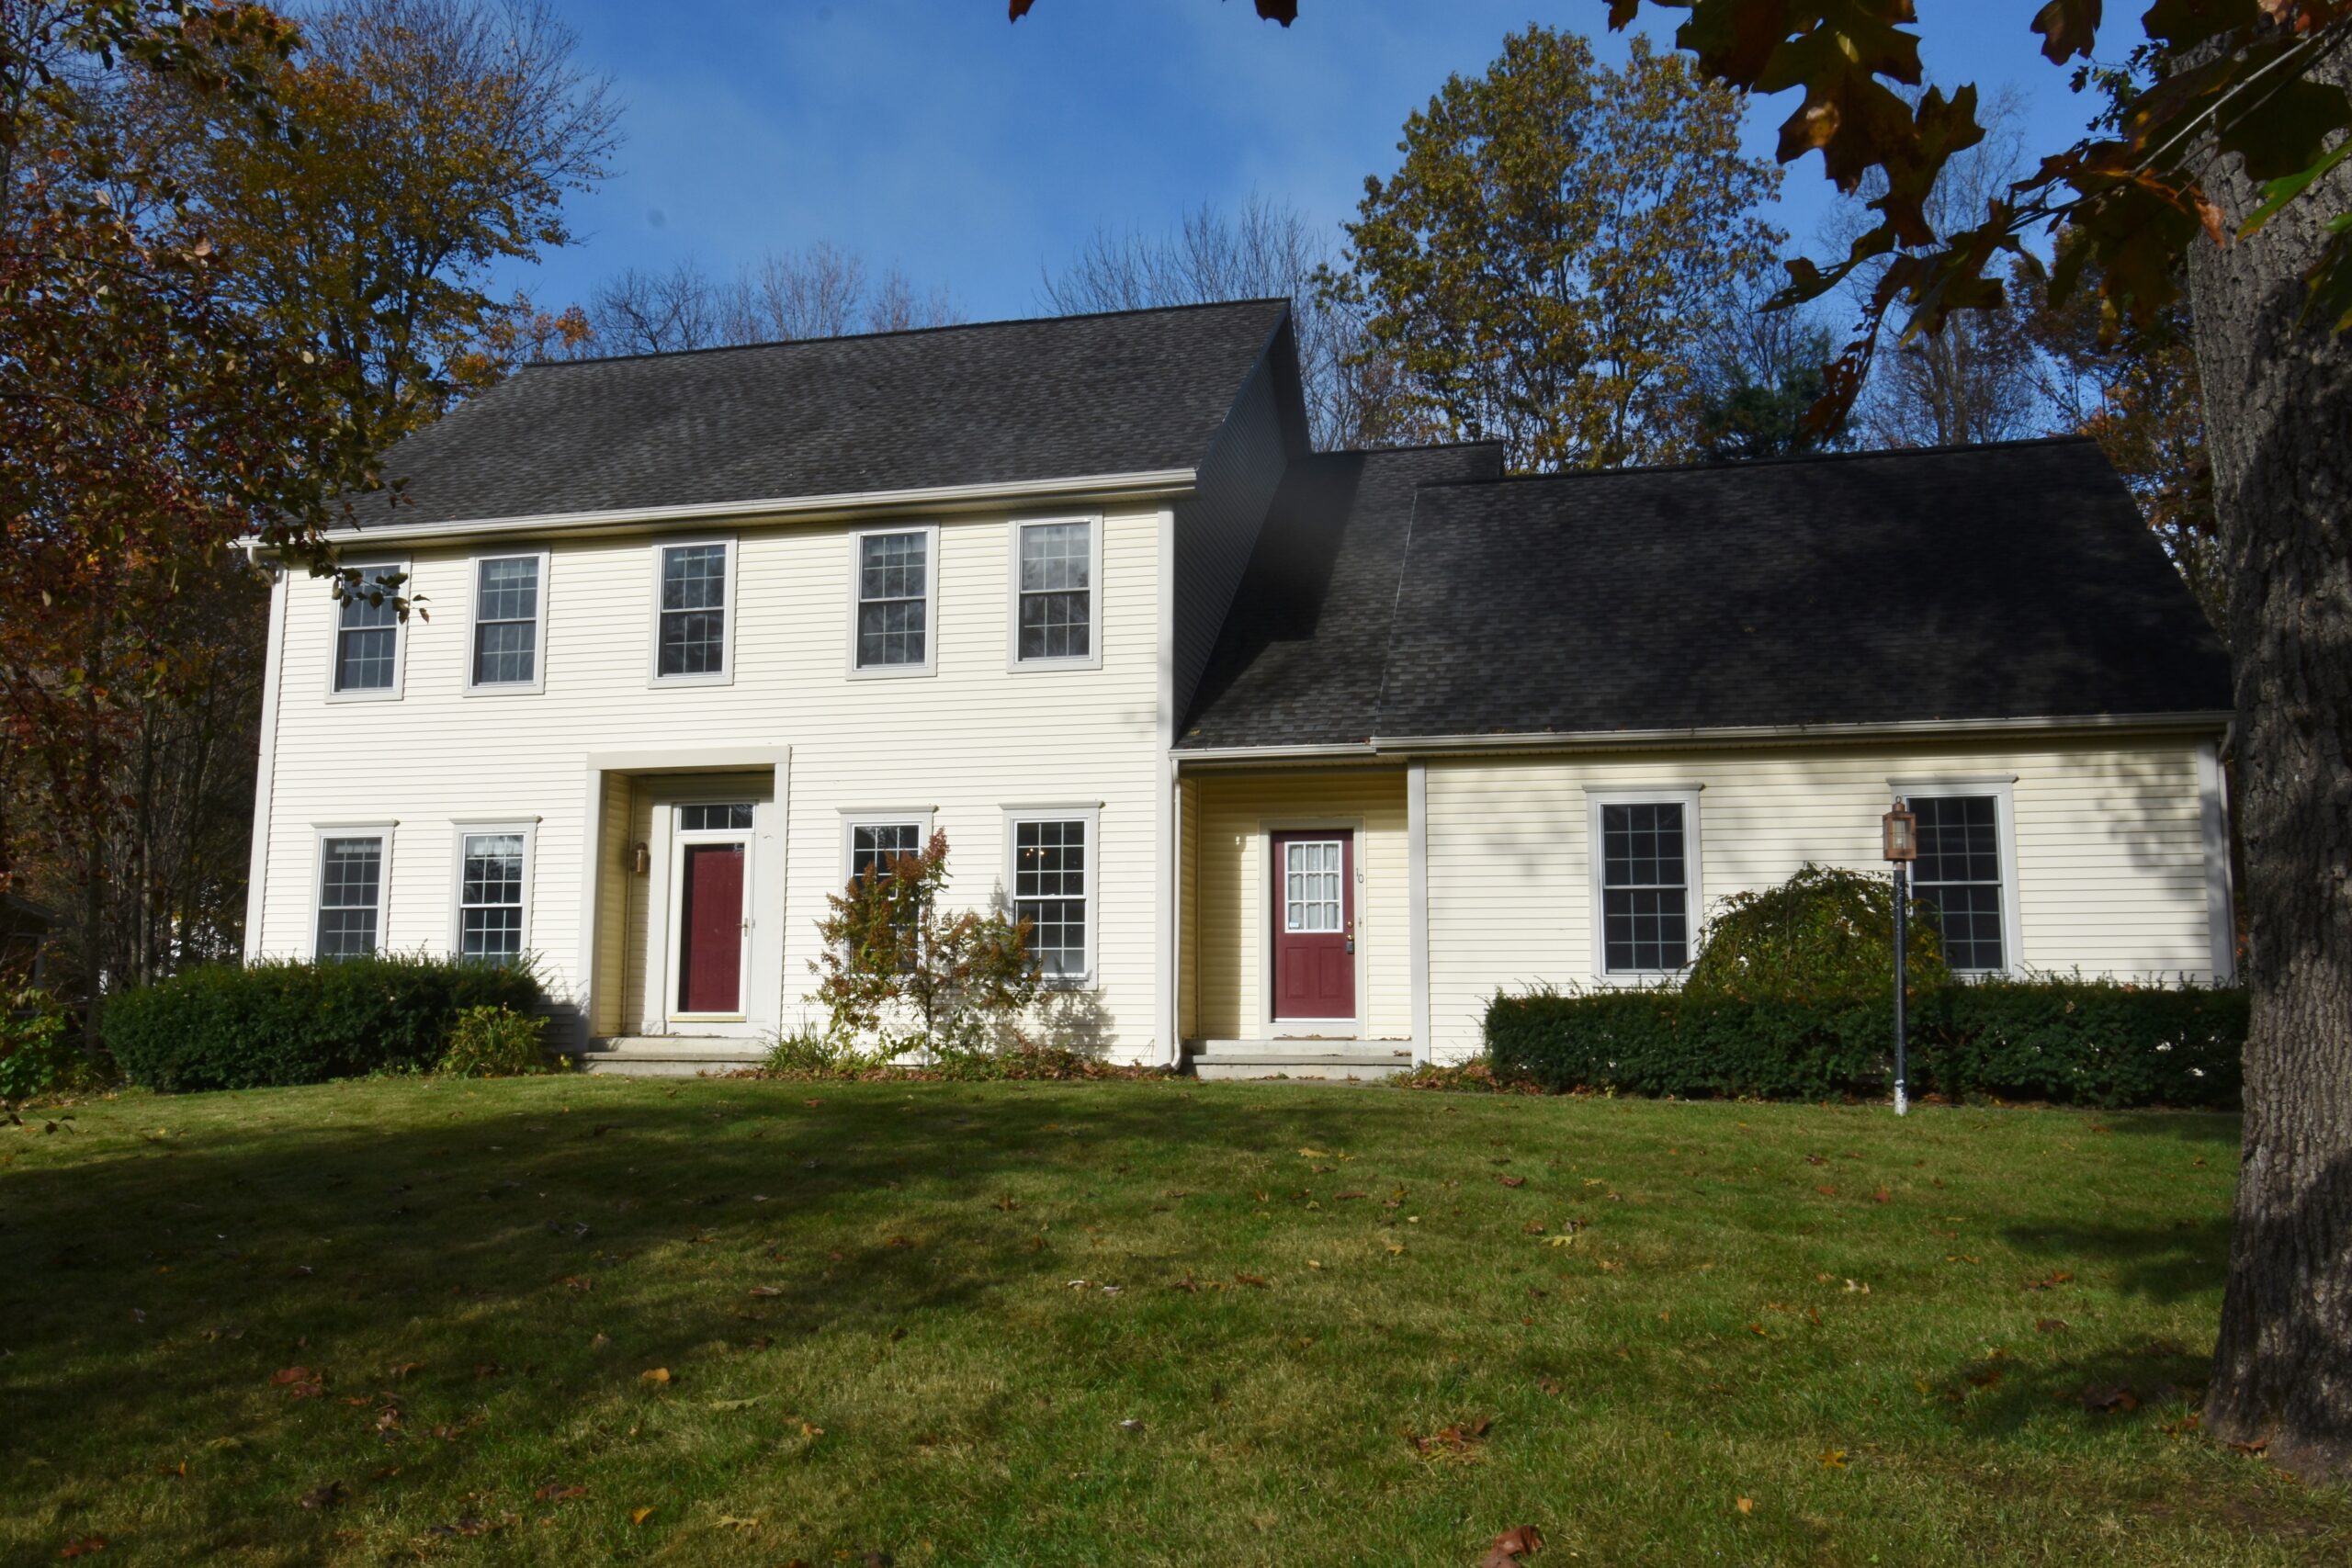 RENTED: Wilton, NY 5 bed 3 1/2 bath- 10 Sweetbriar Drive